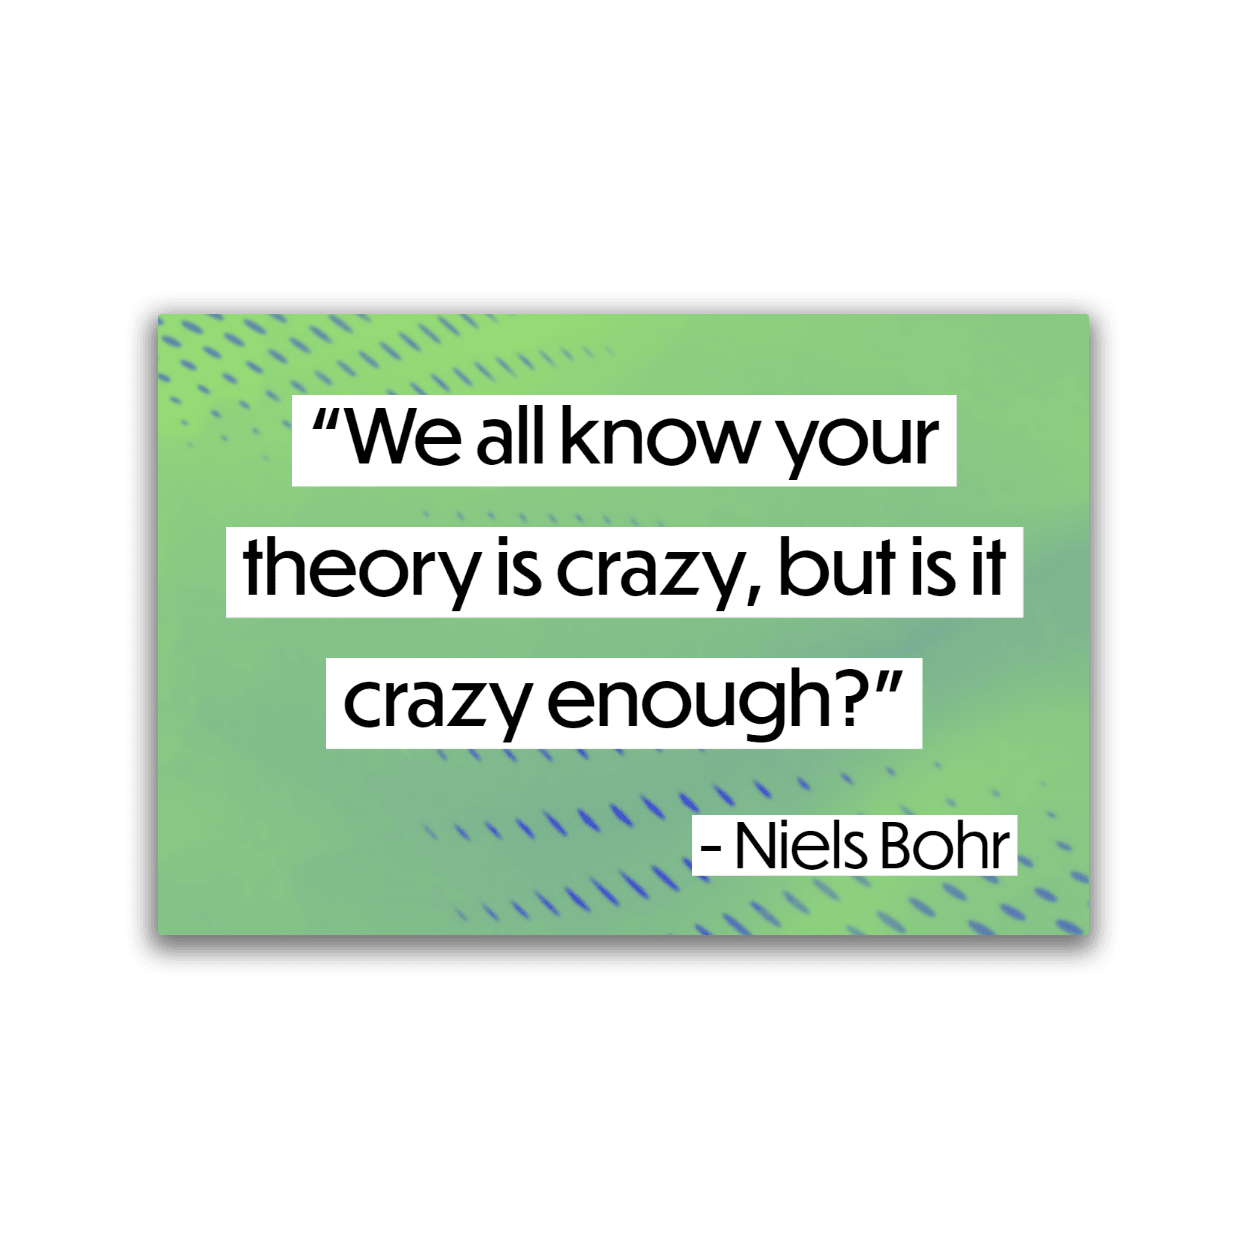 Image of a 2x3 magnet with a Niels Bohr quote